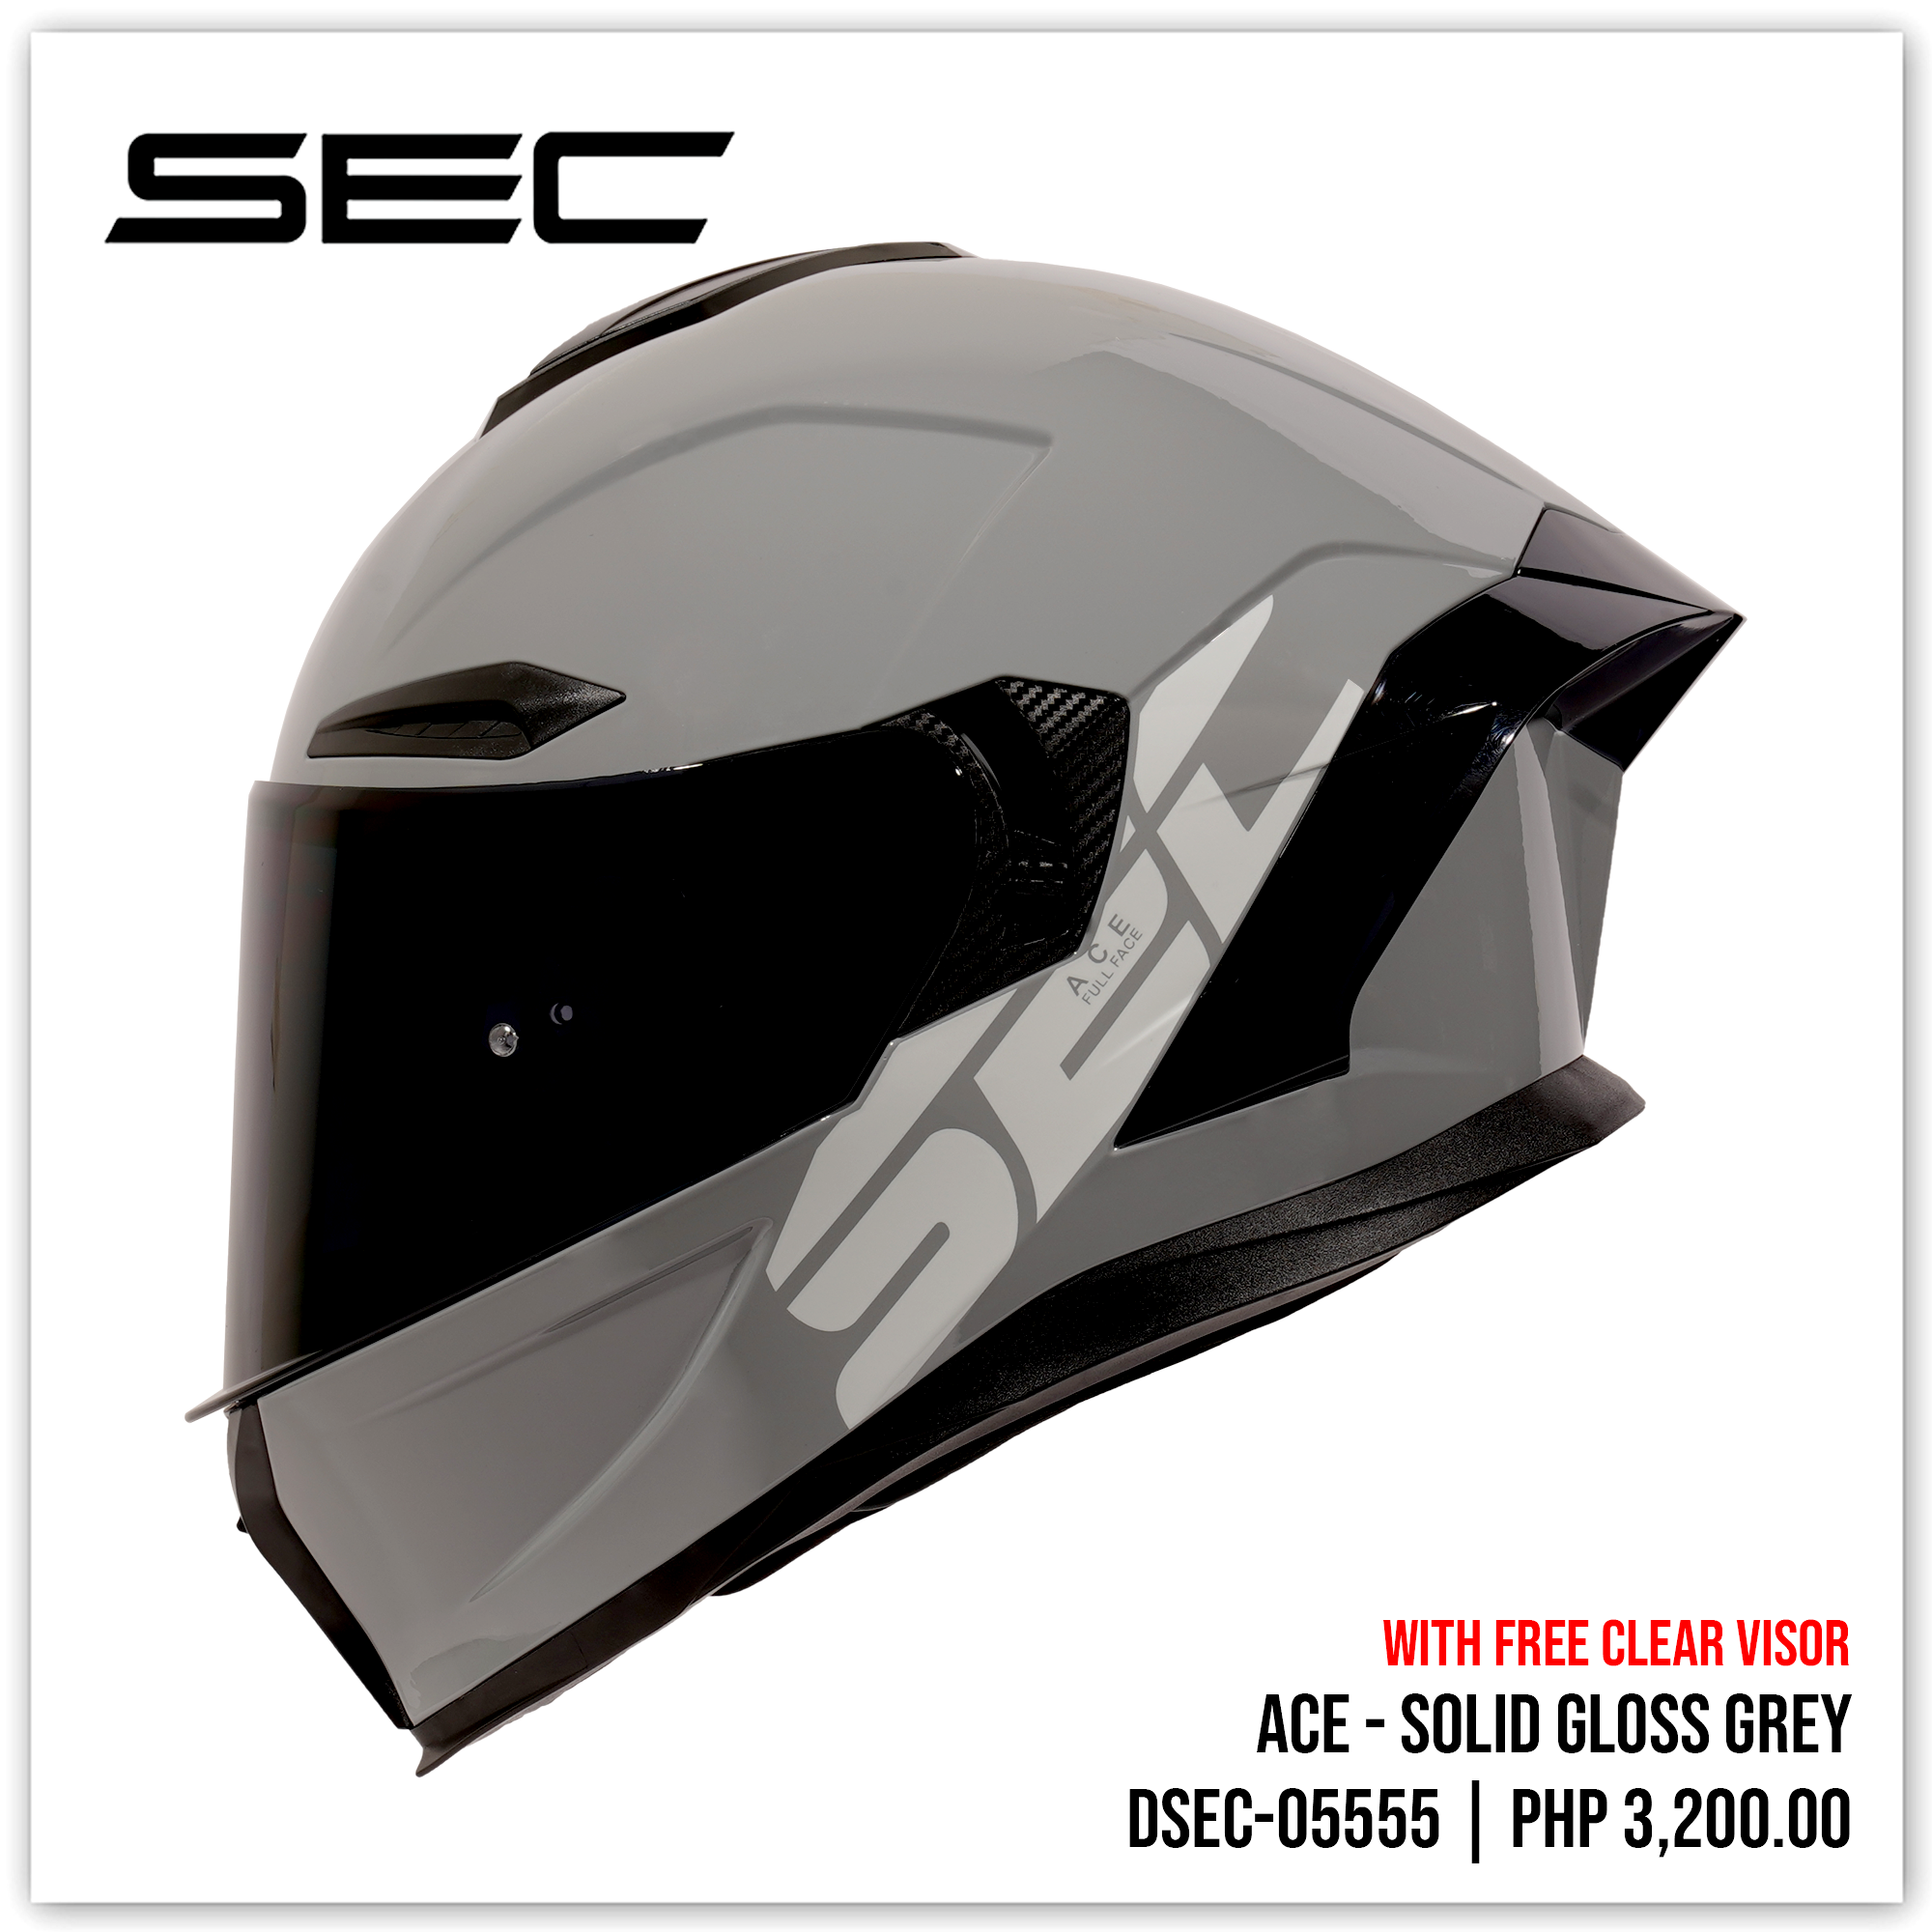 ACE - SOLID GLOSS GREY